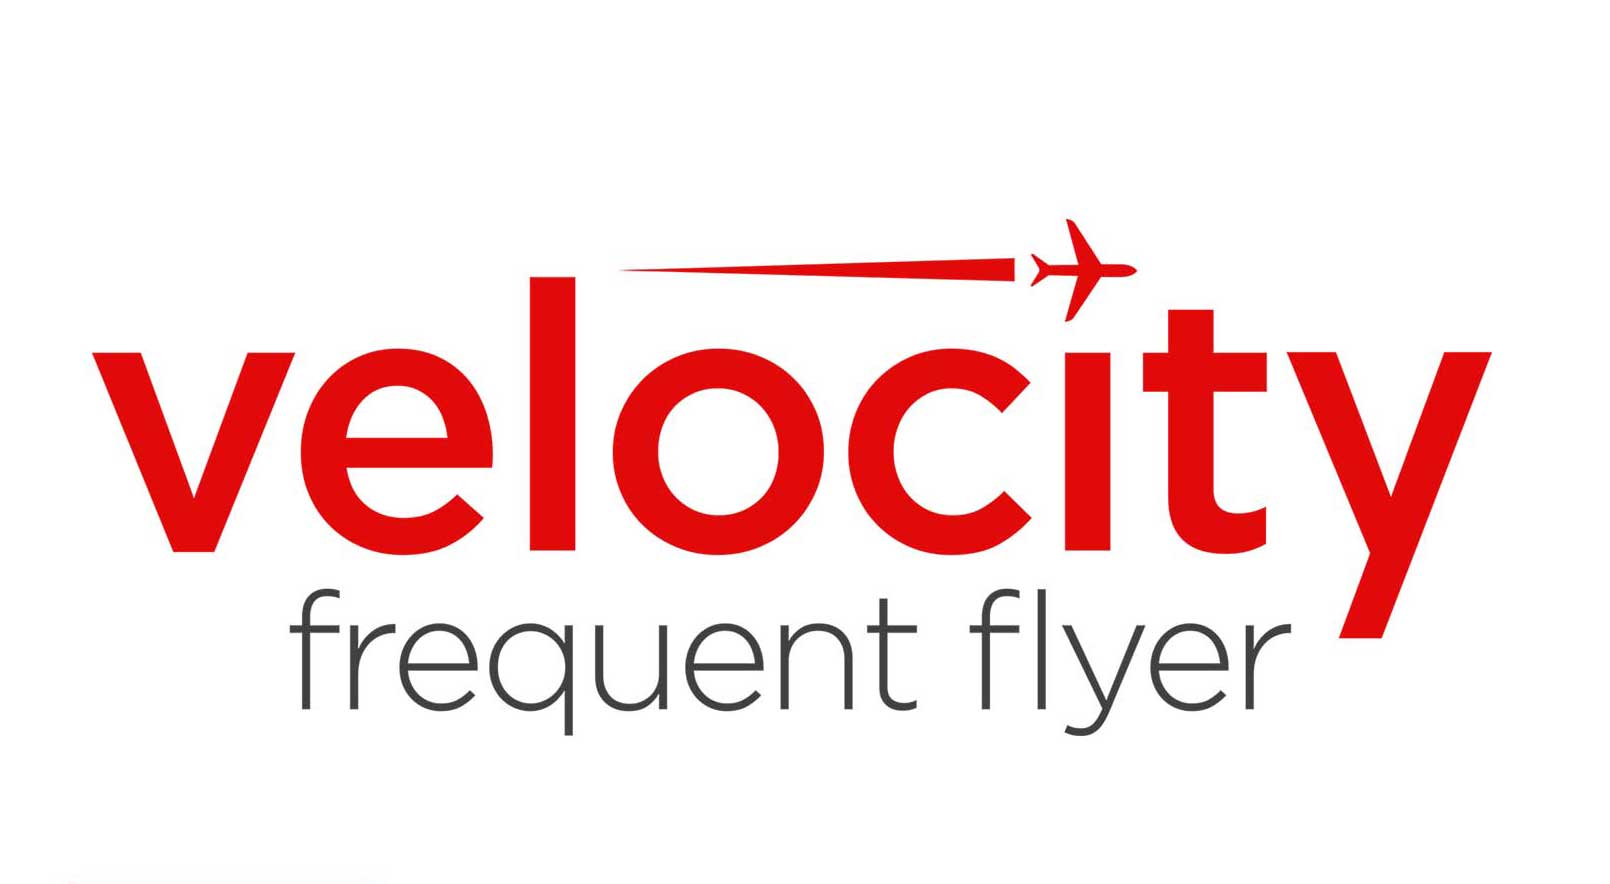 Velocity Frequent Flyer and Virgin Australia Lounge partnership effective 22 August 2022